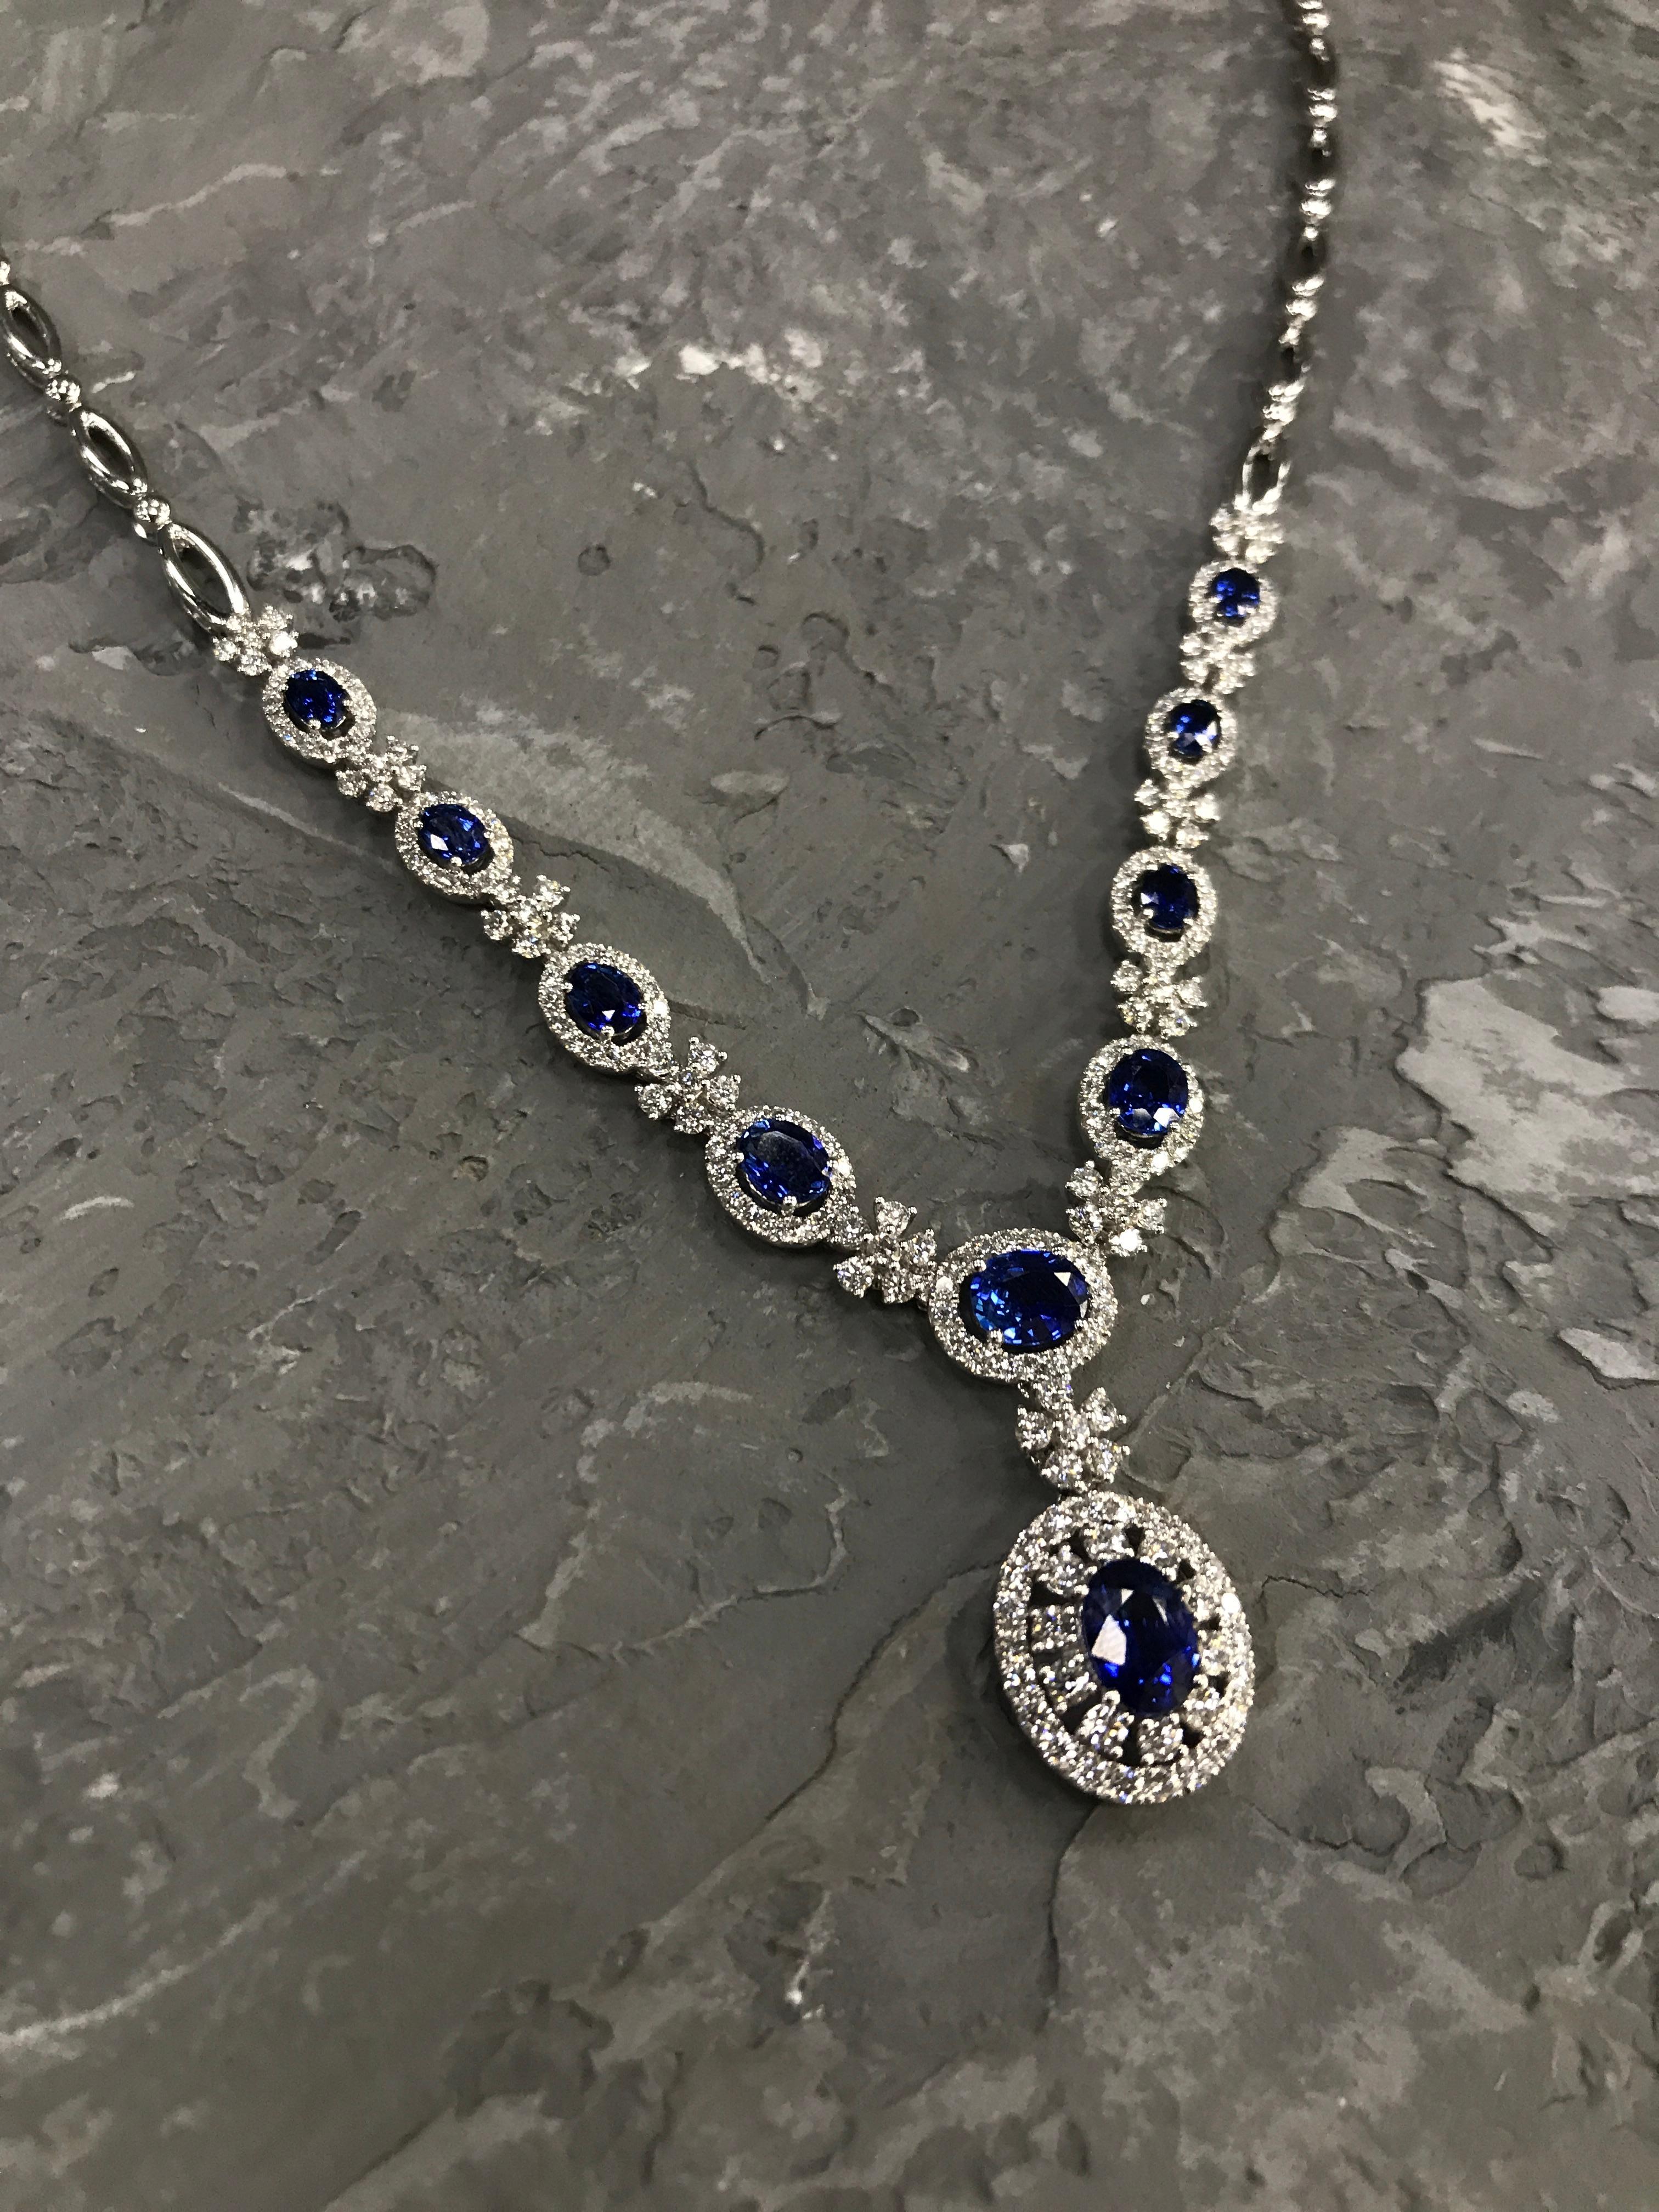 Necklace White Gold 14 K 
Weight 19,81 
Length 46 cm 
Necklace White Gold 14 K 
Diamond 10-Round-0,3ct-4/5A 
Diamond 104-Round-1,56ct-4/5A 
Blue Sapphire 112-Кр57-0,72-4/5A 
Blue Sapphire 2--Oval-1,68 Т(3)/2A